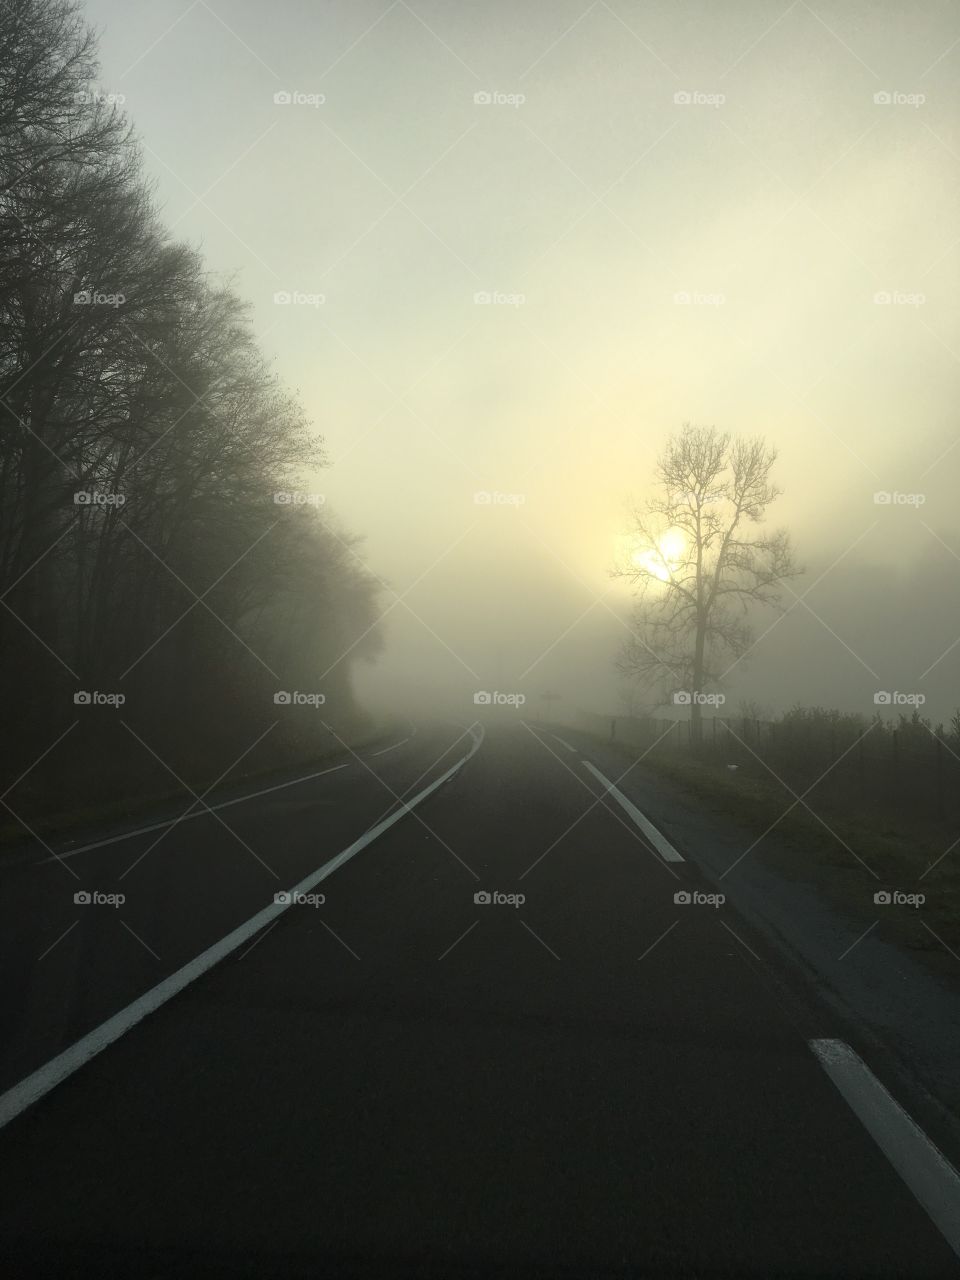 On the road in Fog and winter sun  